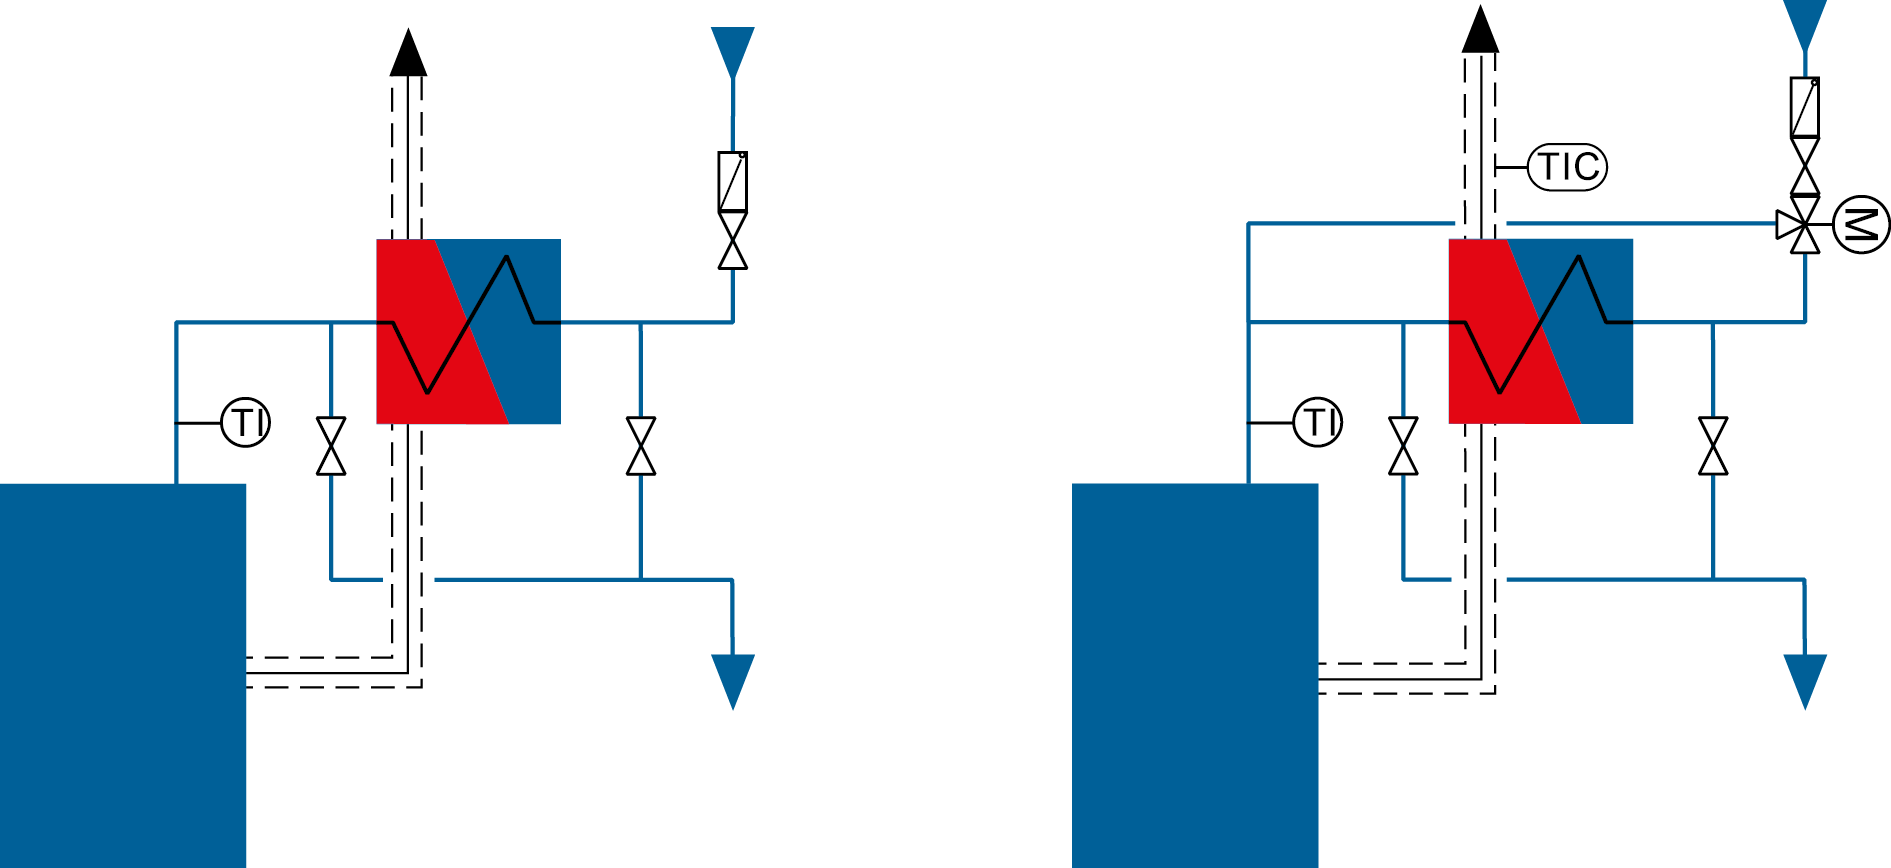 Economiser without shut-off facility, uncontrolled (left) and economiser without shut-off facility, controlled on the water side (right)